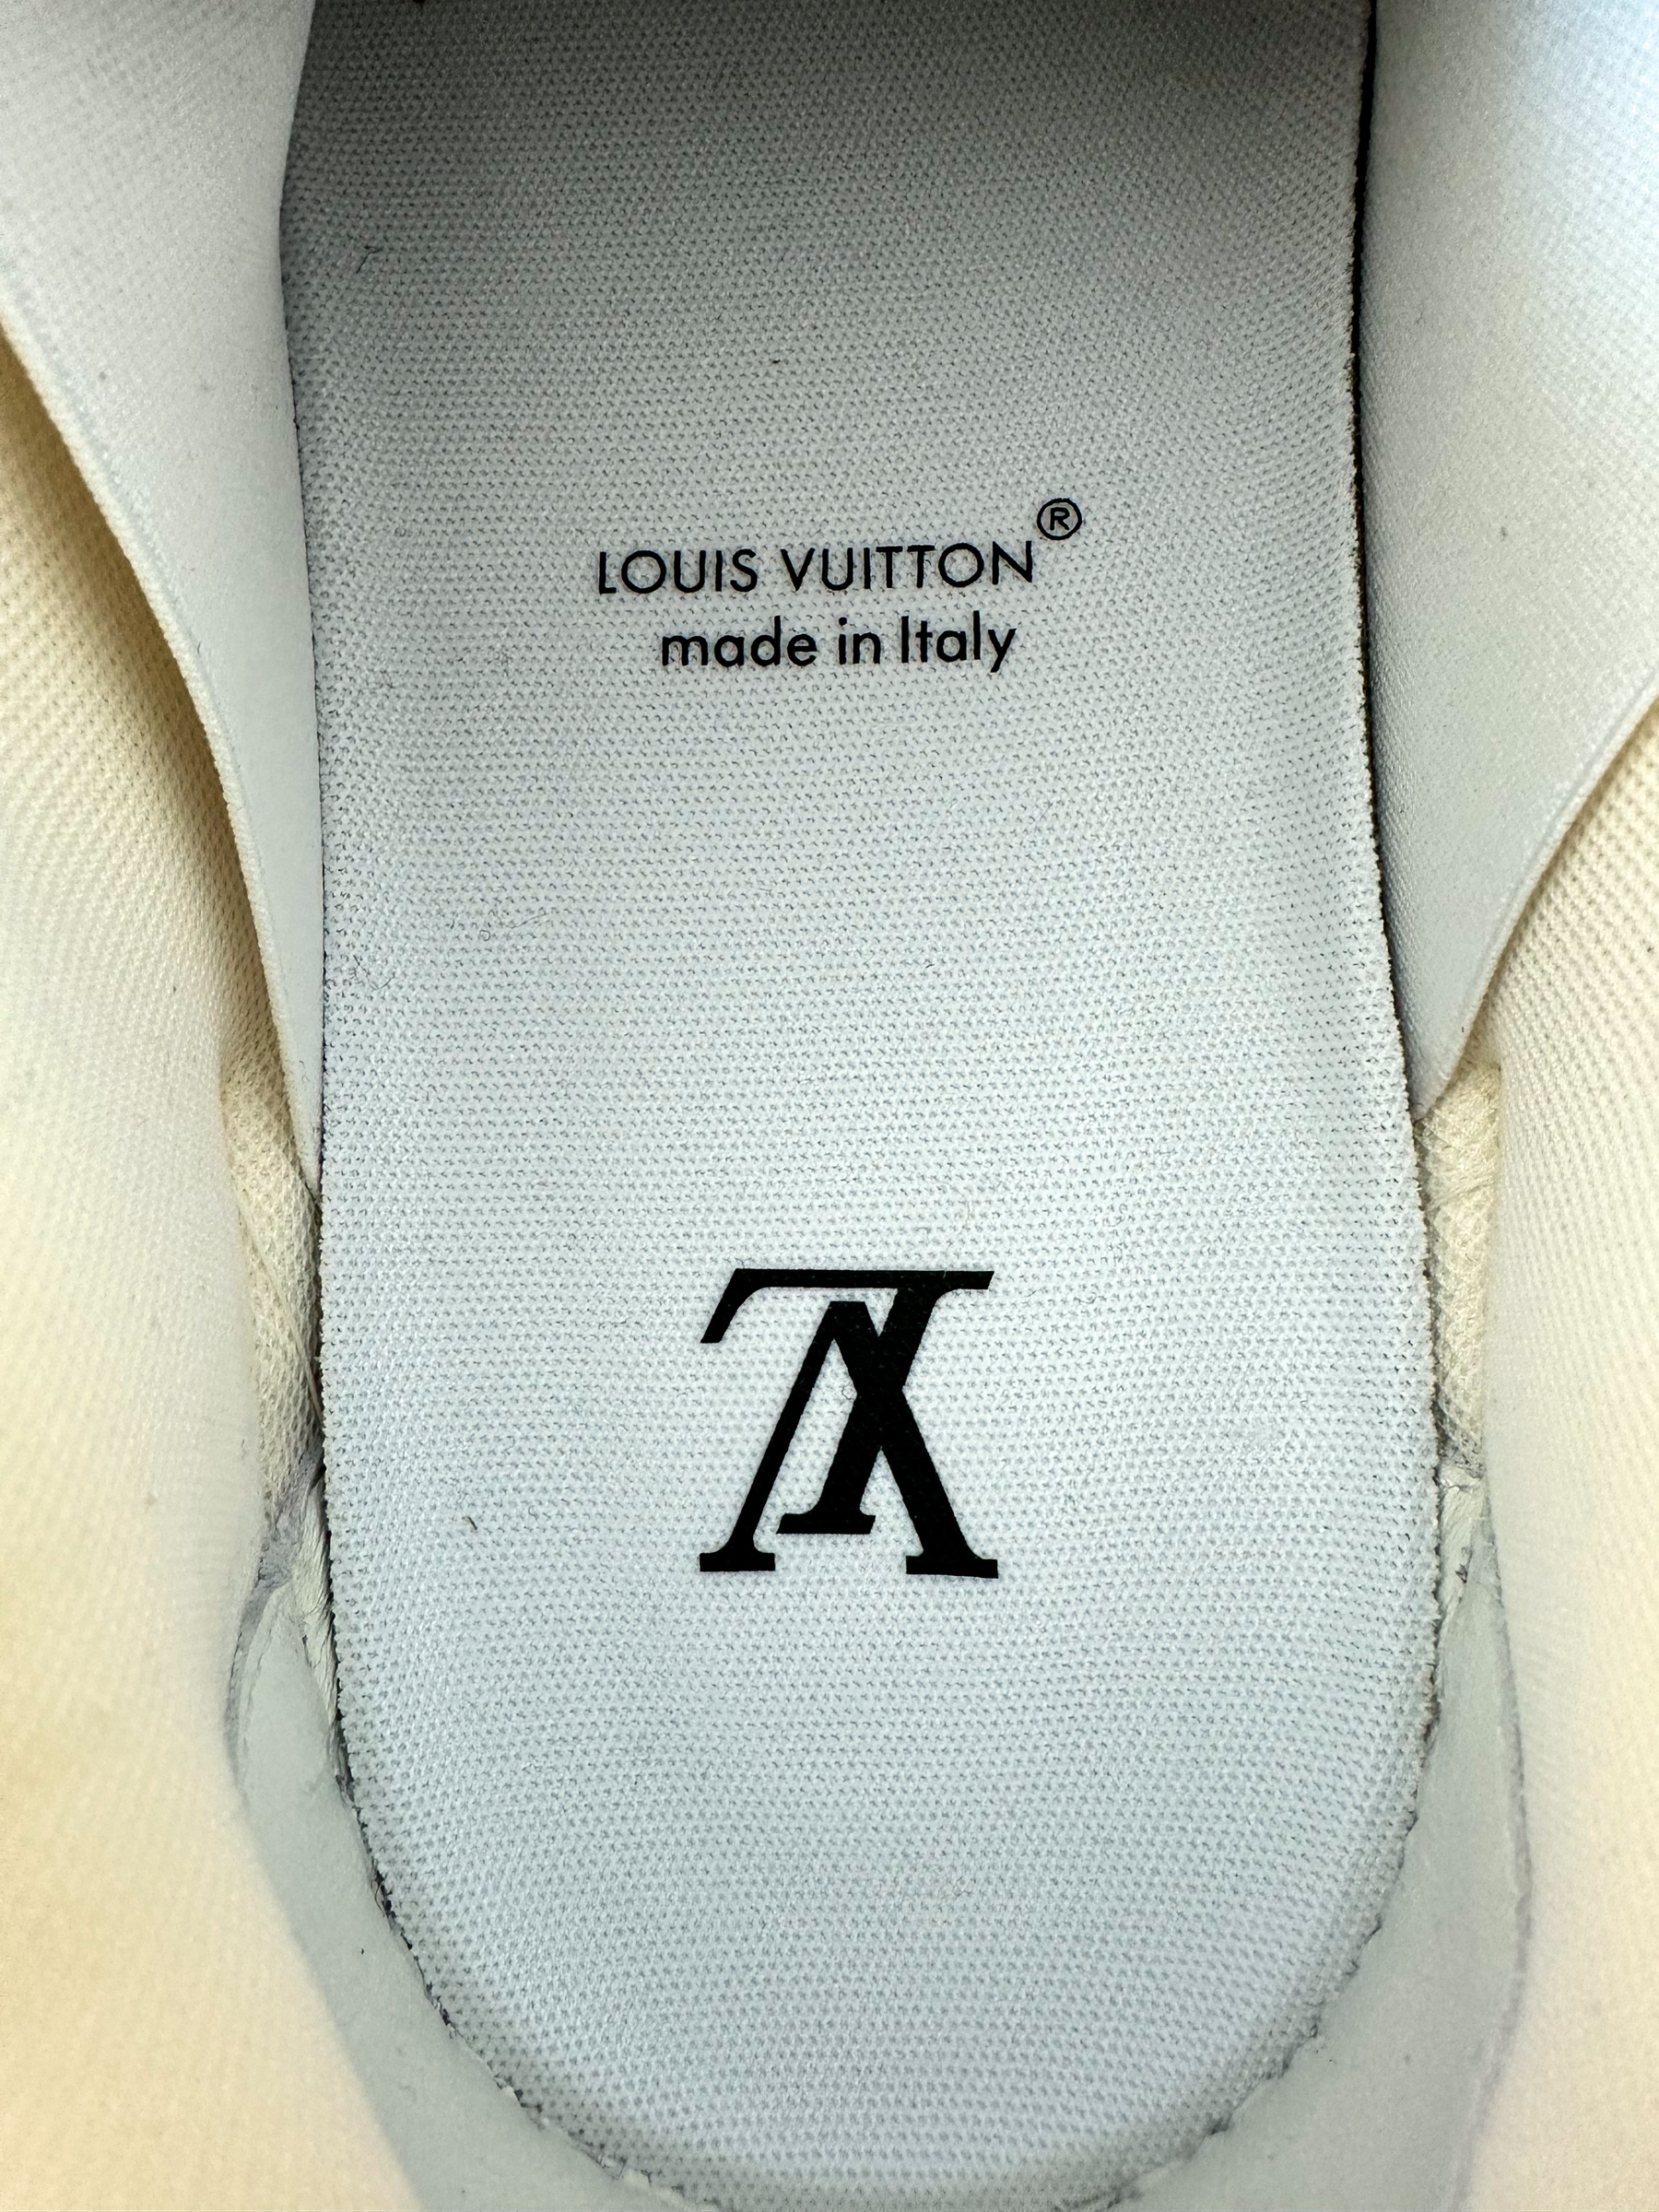 LOUIS VUITTON TRAINER MAXI LOW-TOP SNEAKERS IN WHITE AND ORANGE